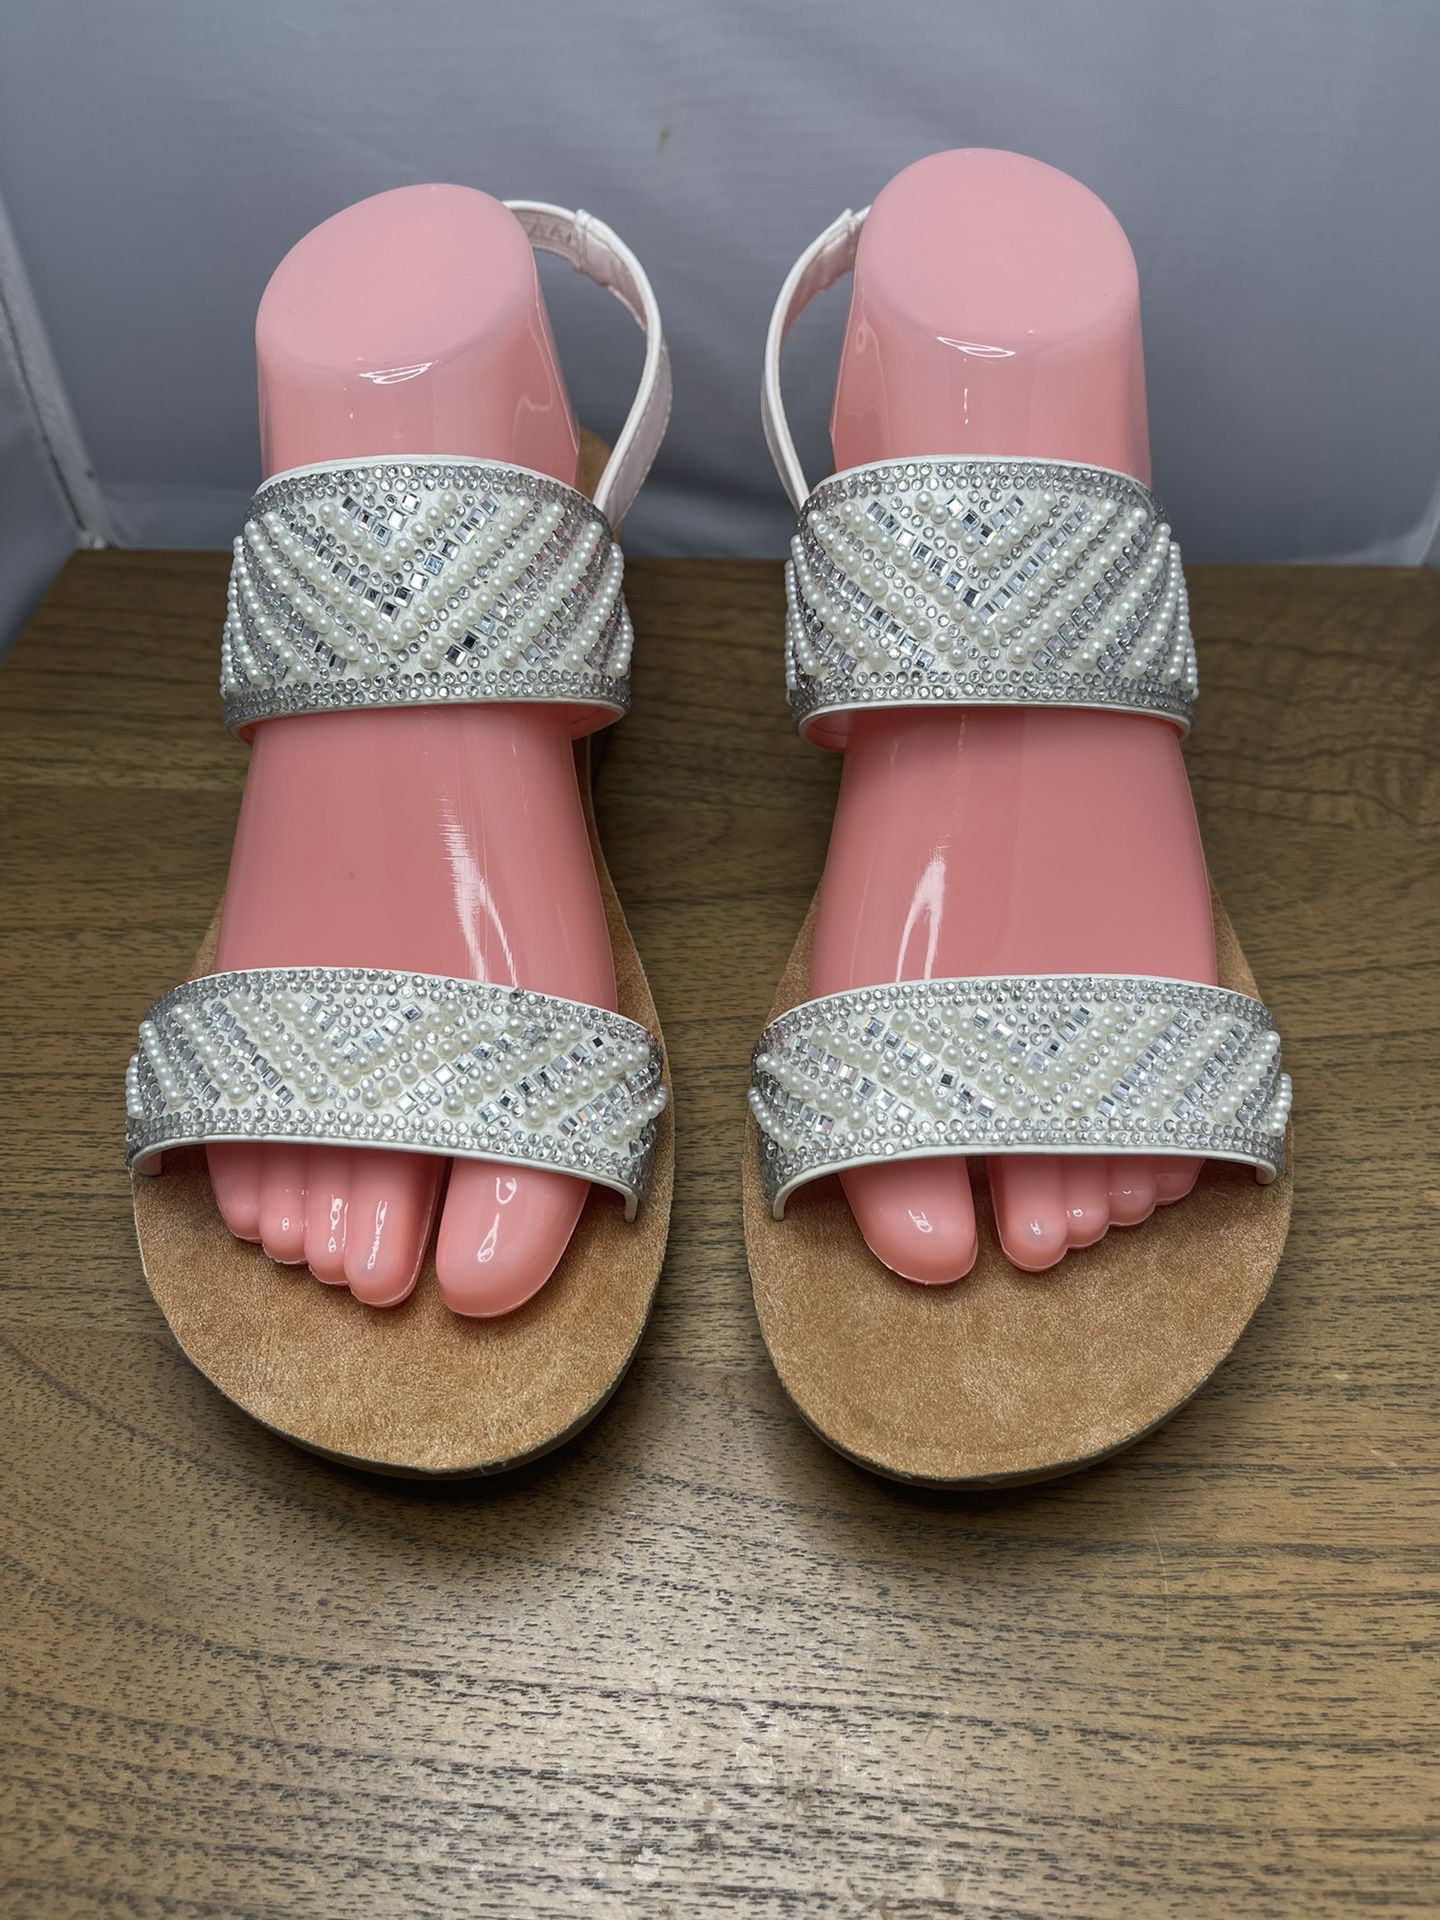 daisy fuentes Sandals for Sale in Las Vegas, NV - OfferUp